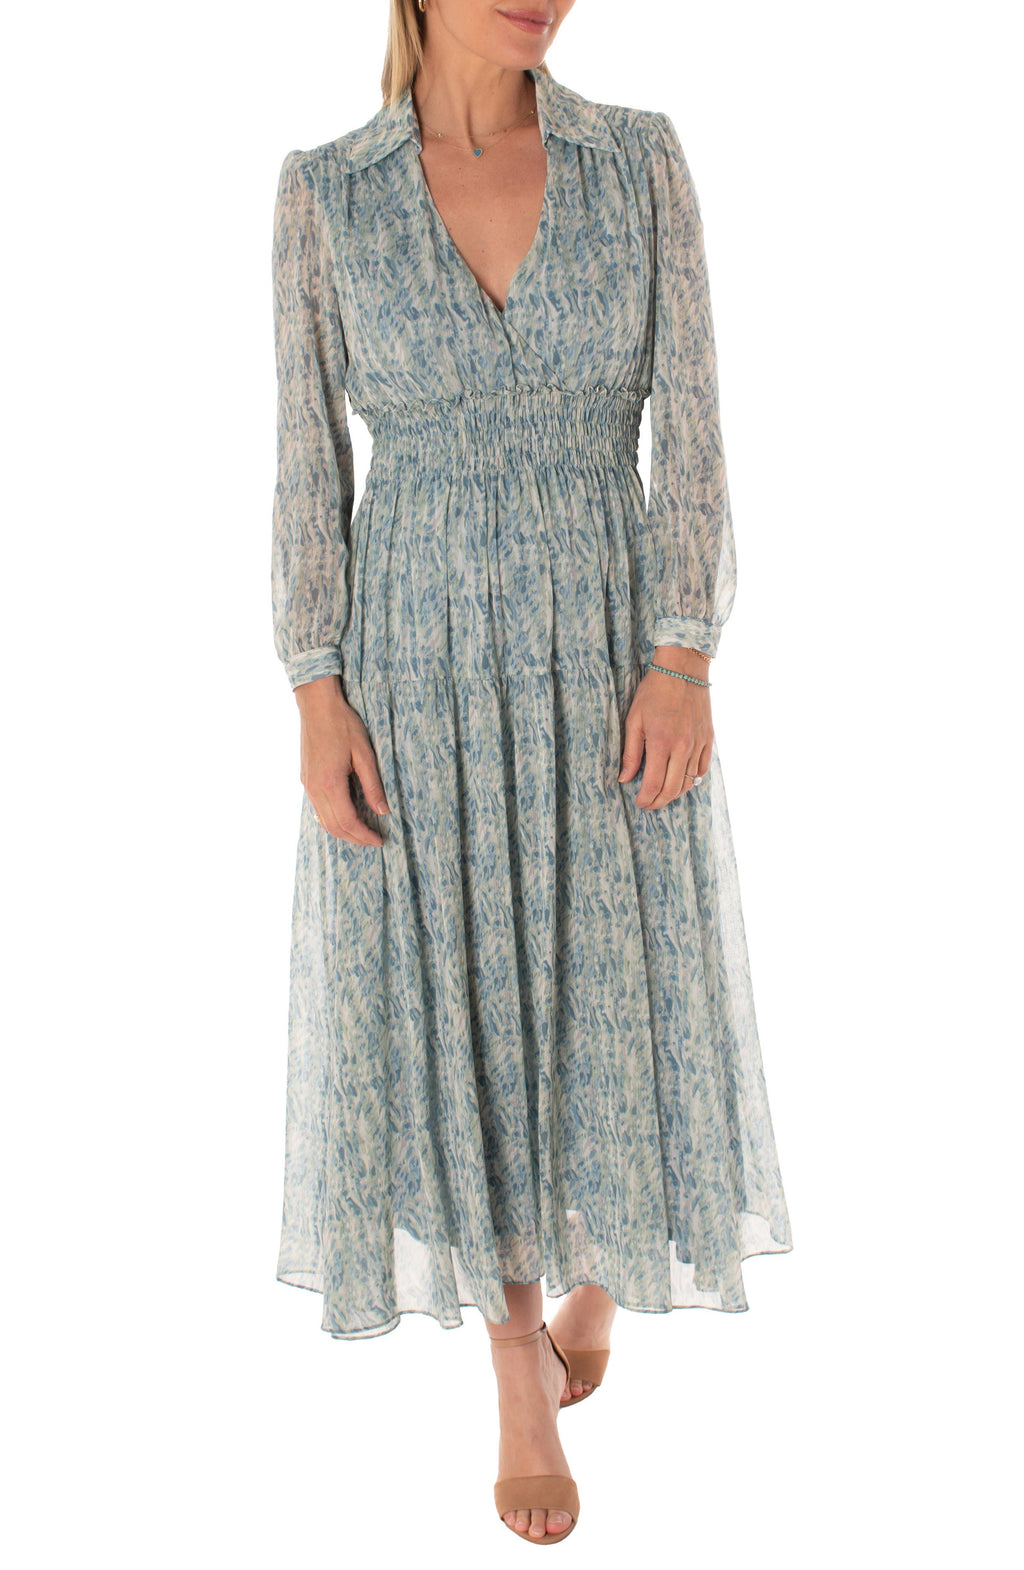 TAYLOR DRESSES Long Sleeve Smocked Maxi Dress, Main, color, SAGE PERIWINKLE